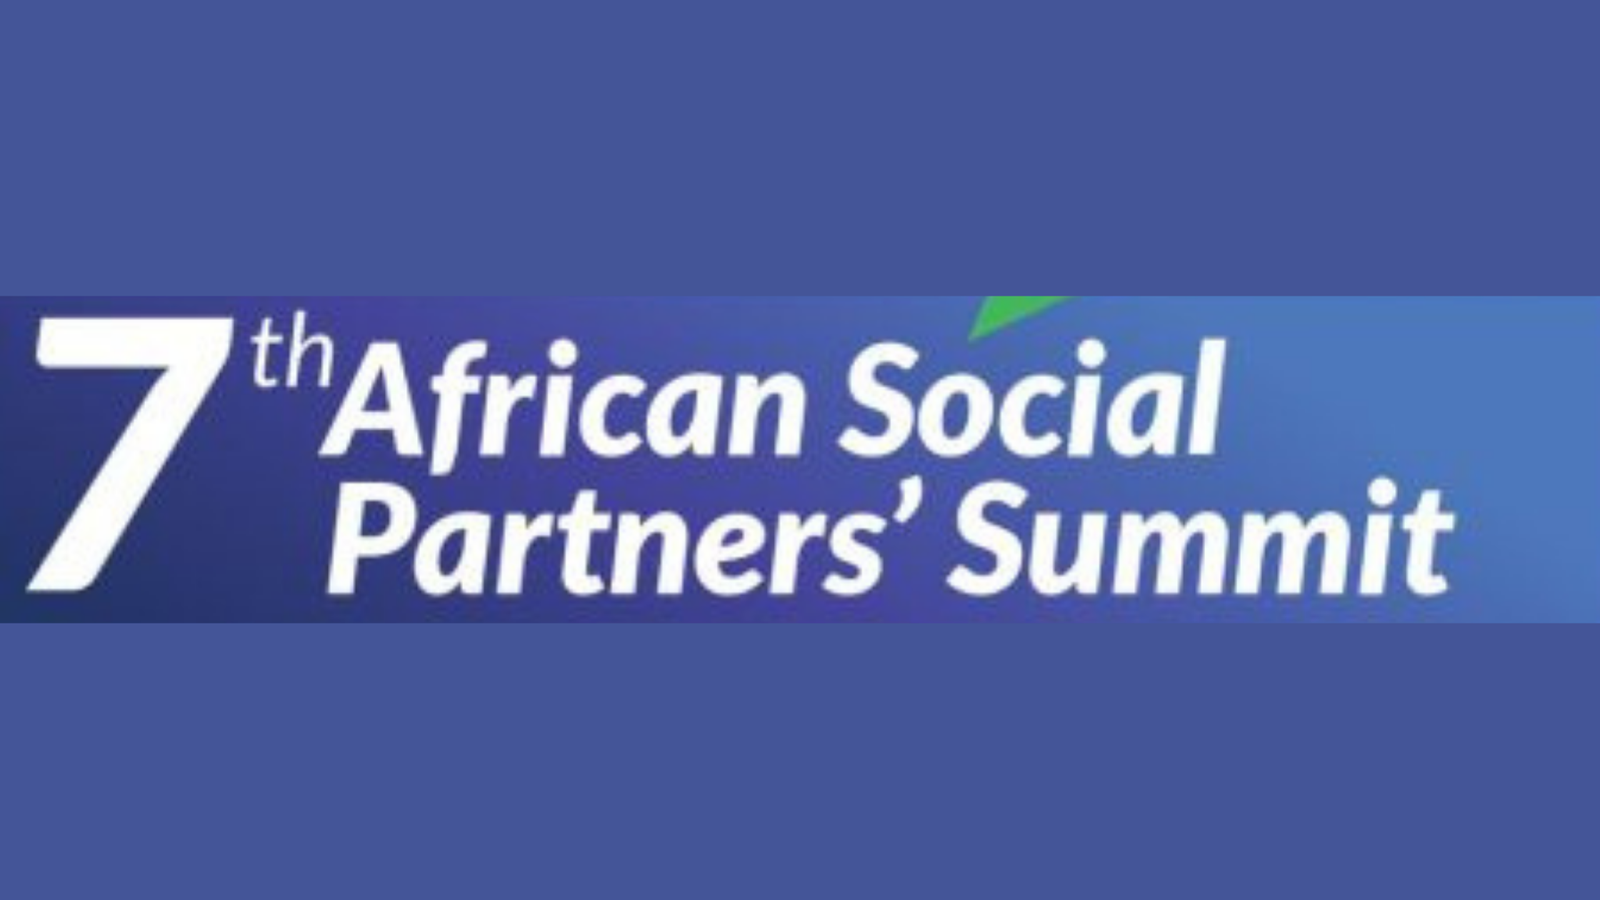 OATUU participates in 7th African Social Partners Summit